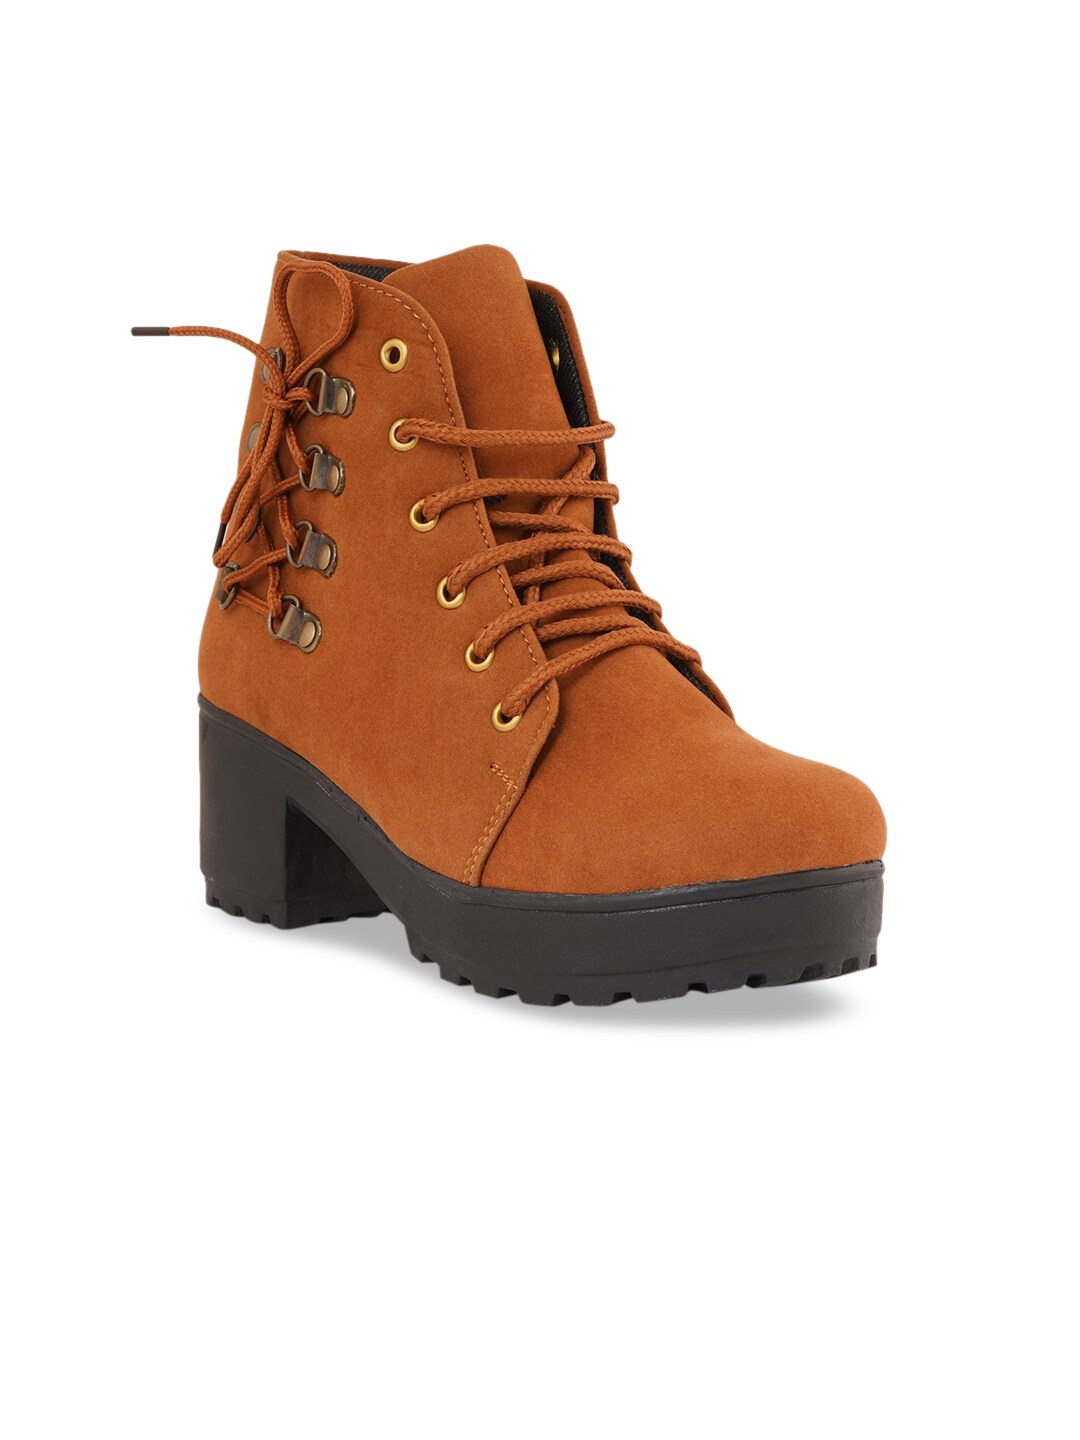 SAPATOS Women Tan Suede Boots Price in India